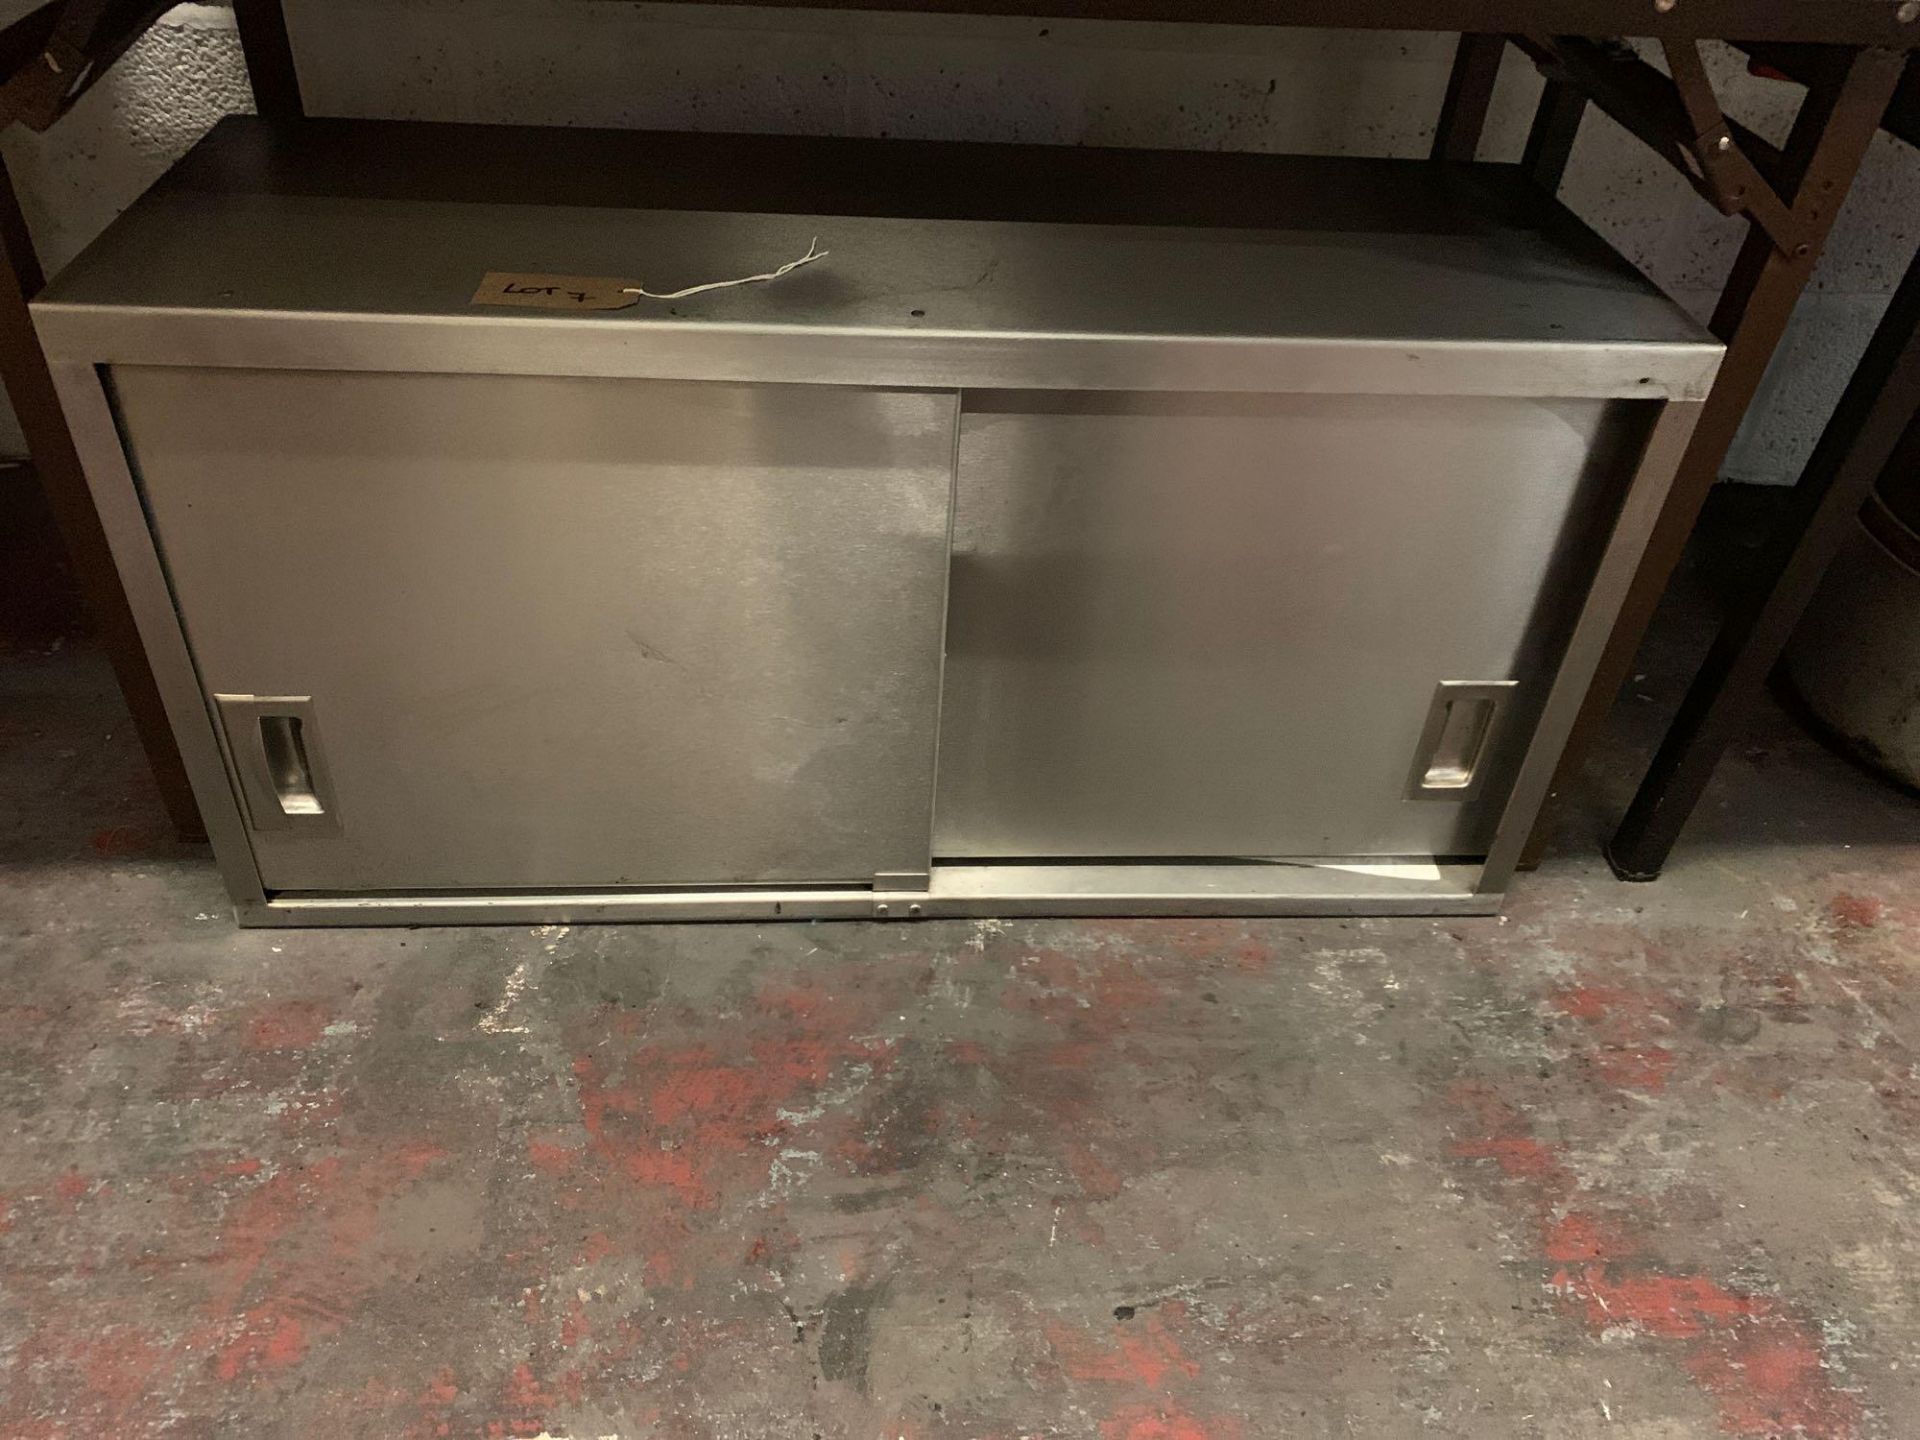 Stainless Steel Commercial Kitchen Wall Cupboard. 2x Sliding Doors 100 X 36 X 50cm